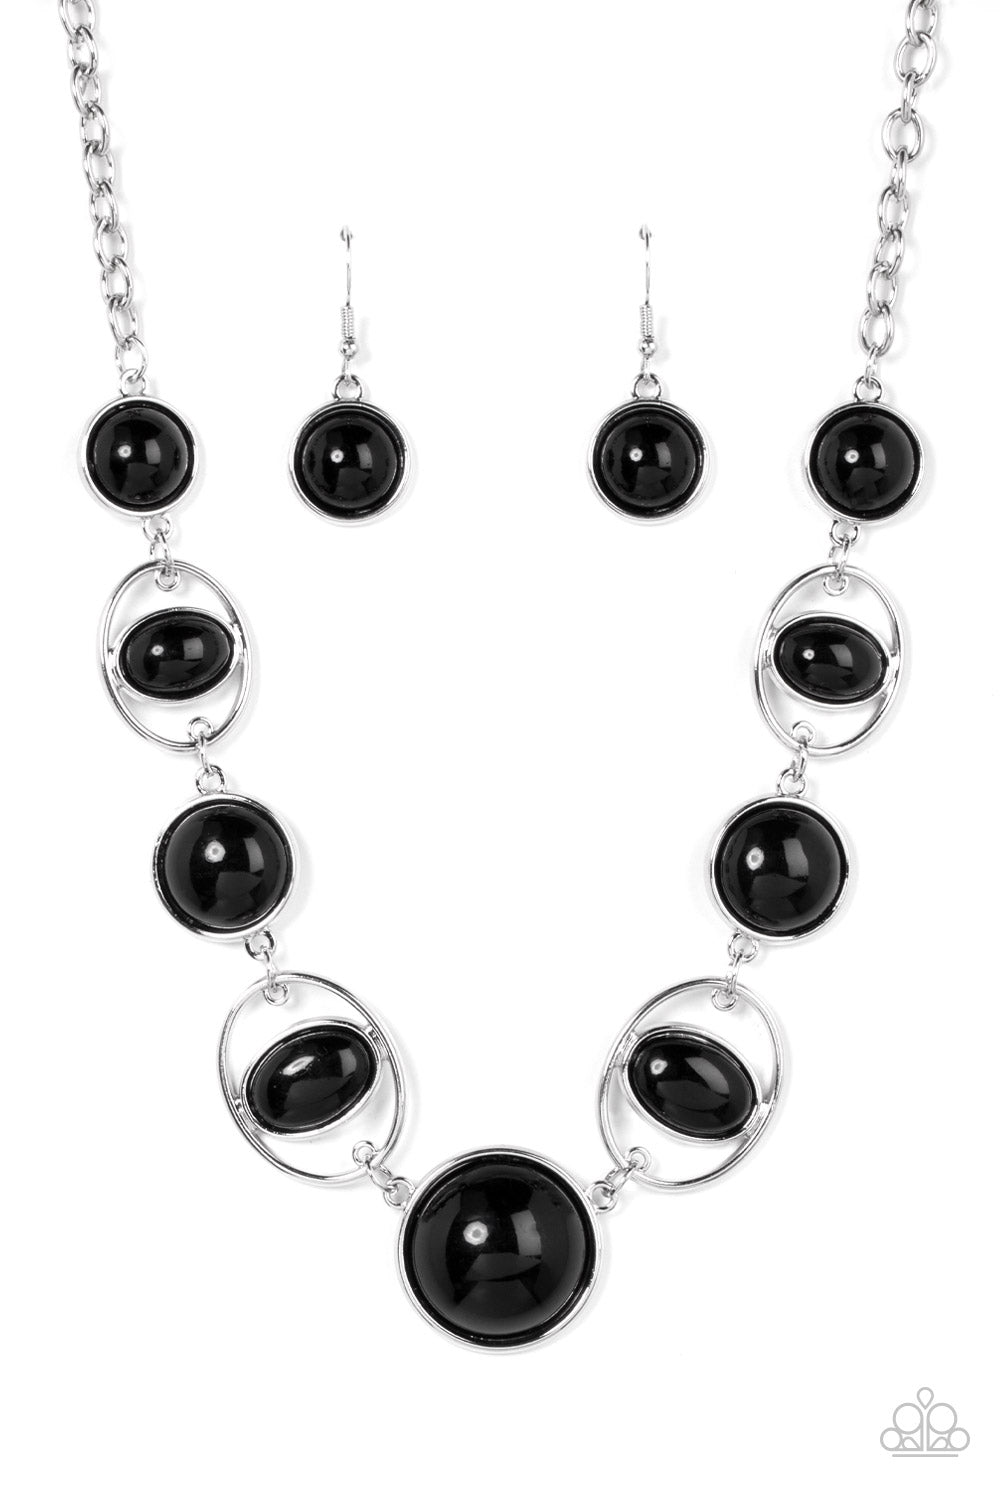 Eye of the BEAD-holder Black Necklace